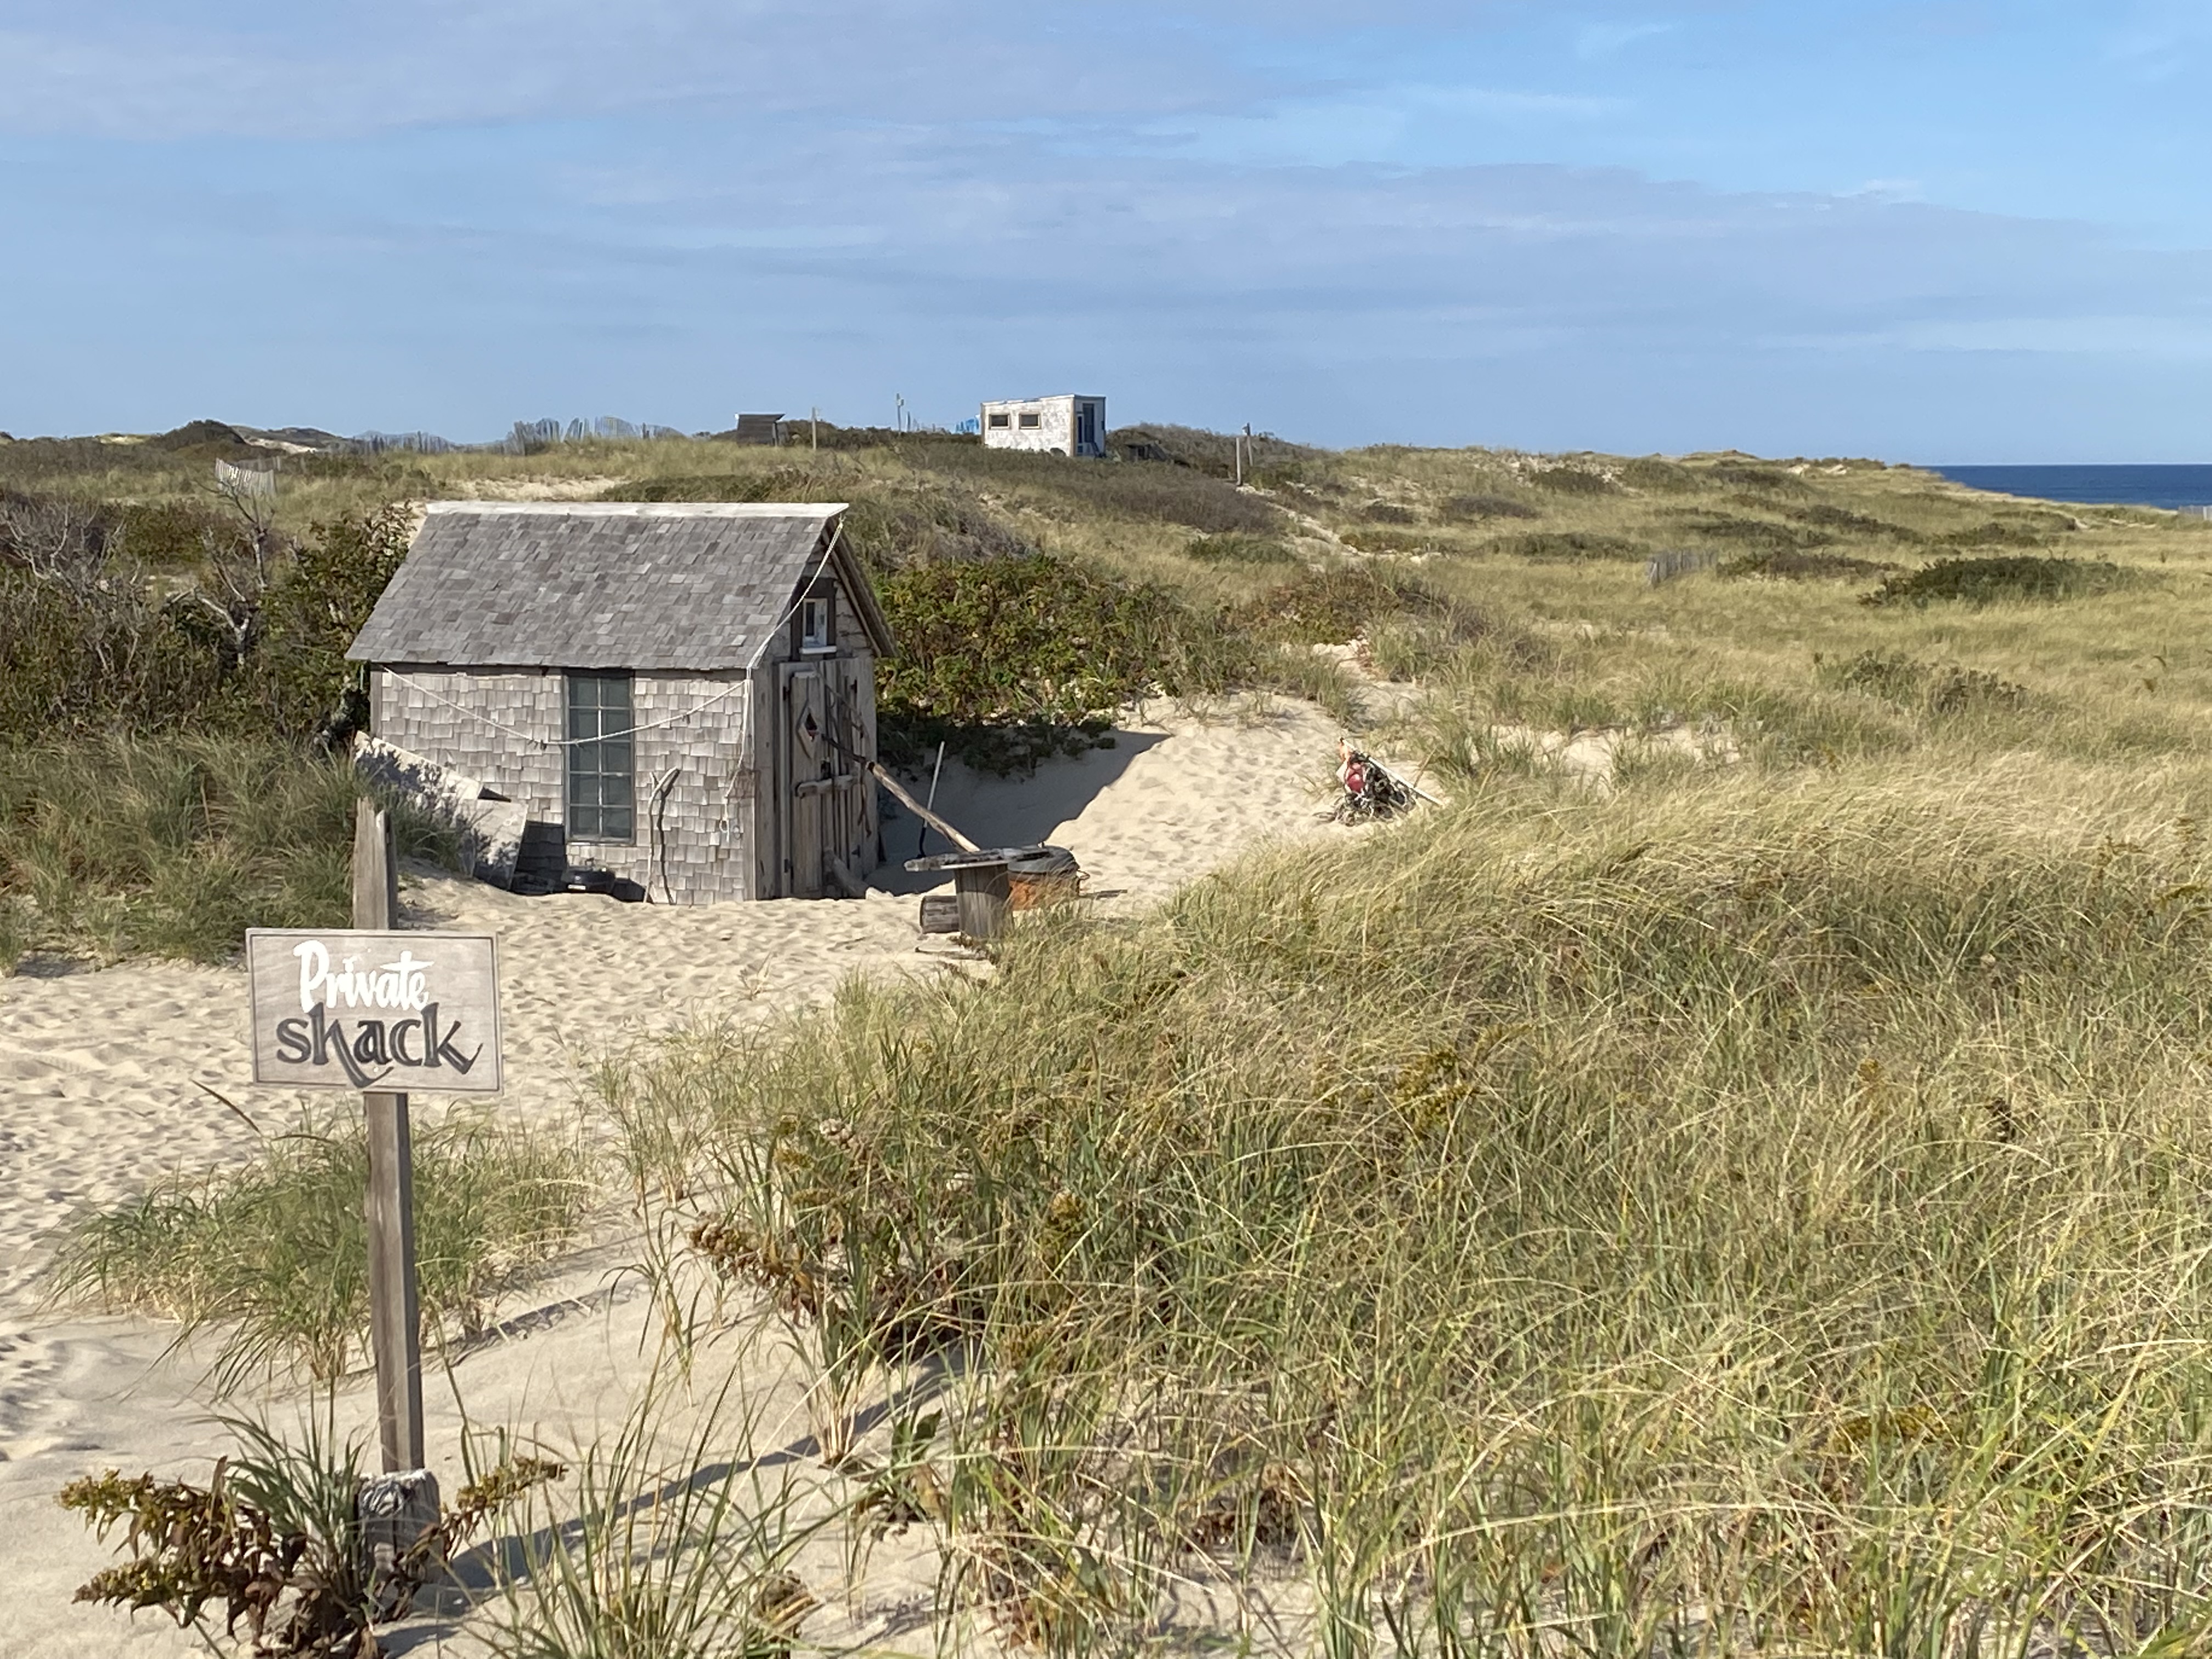 A dune shack sits among rolling sand dunes against a blue sky.